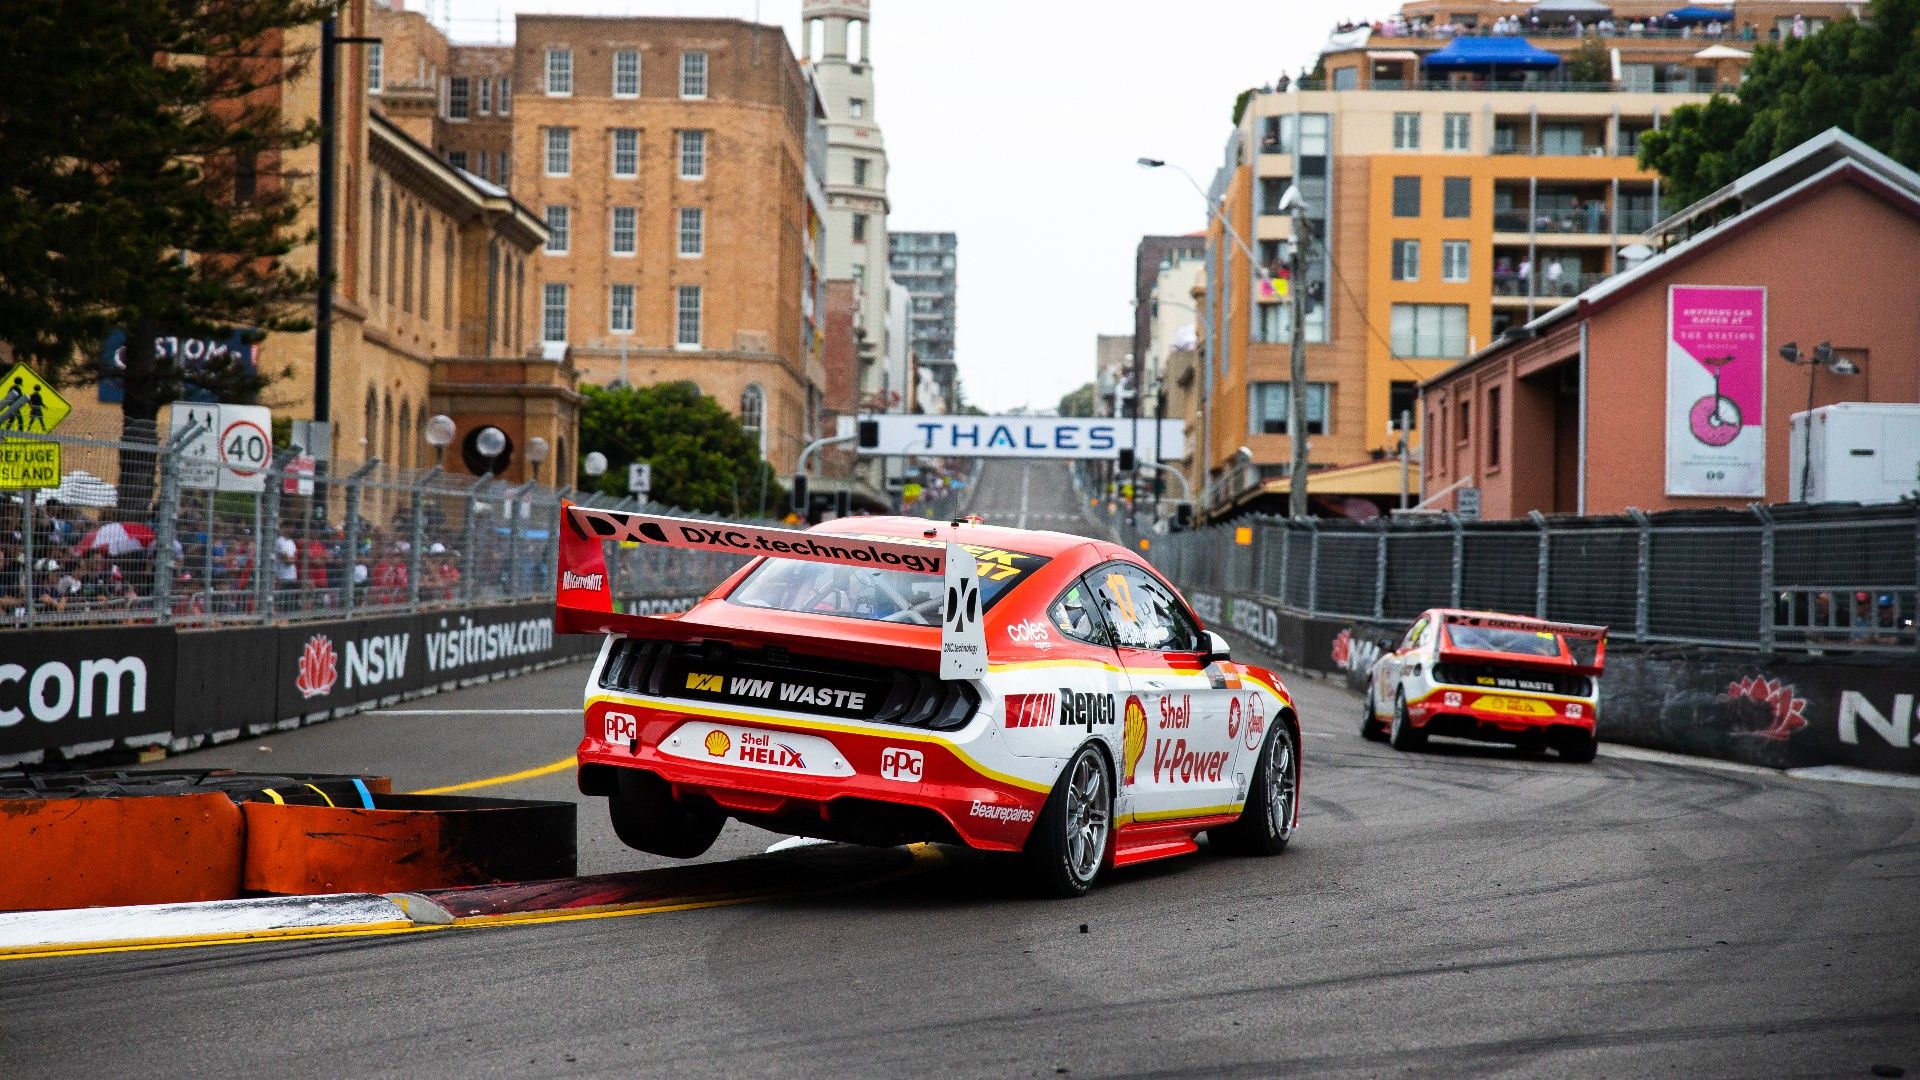 Newcastle 500 postponed due to COVID-19 concerns in the city